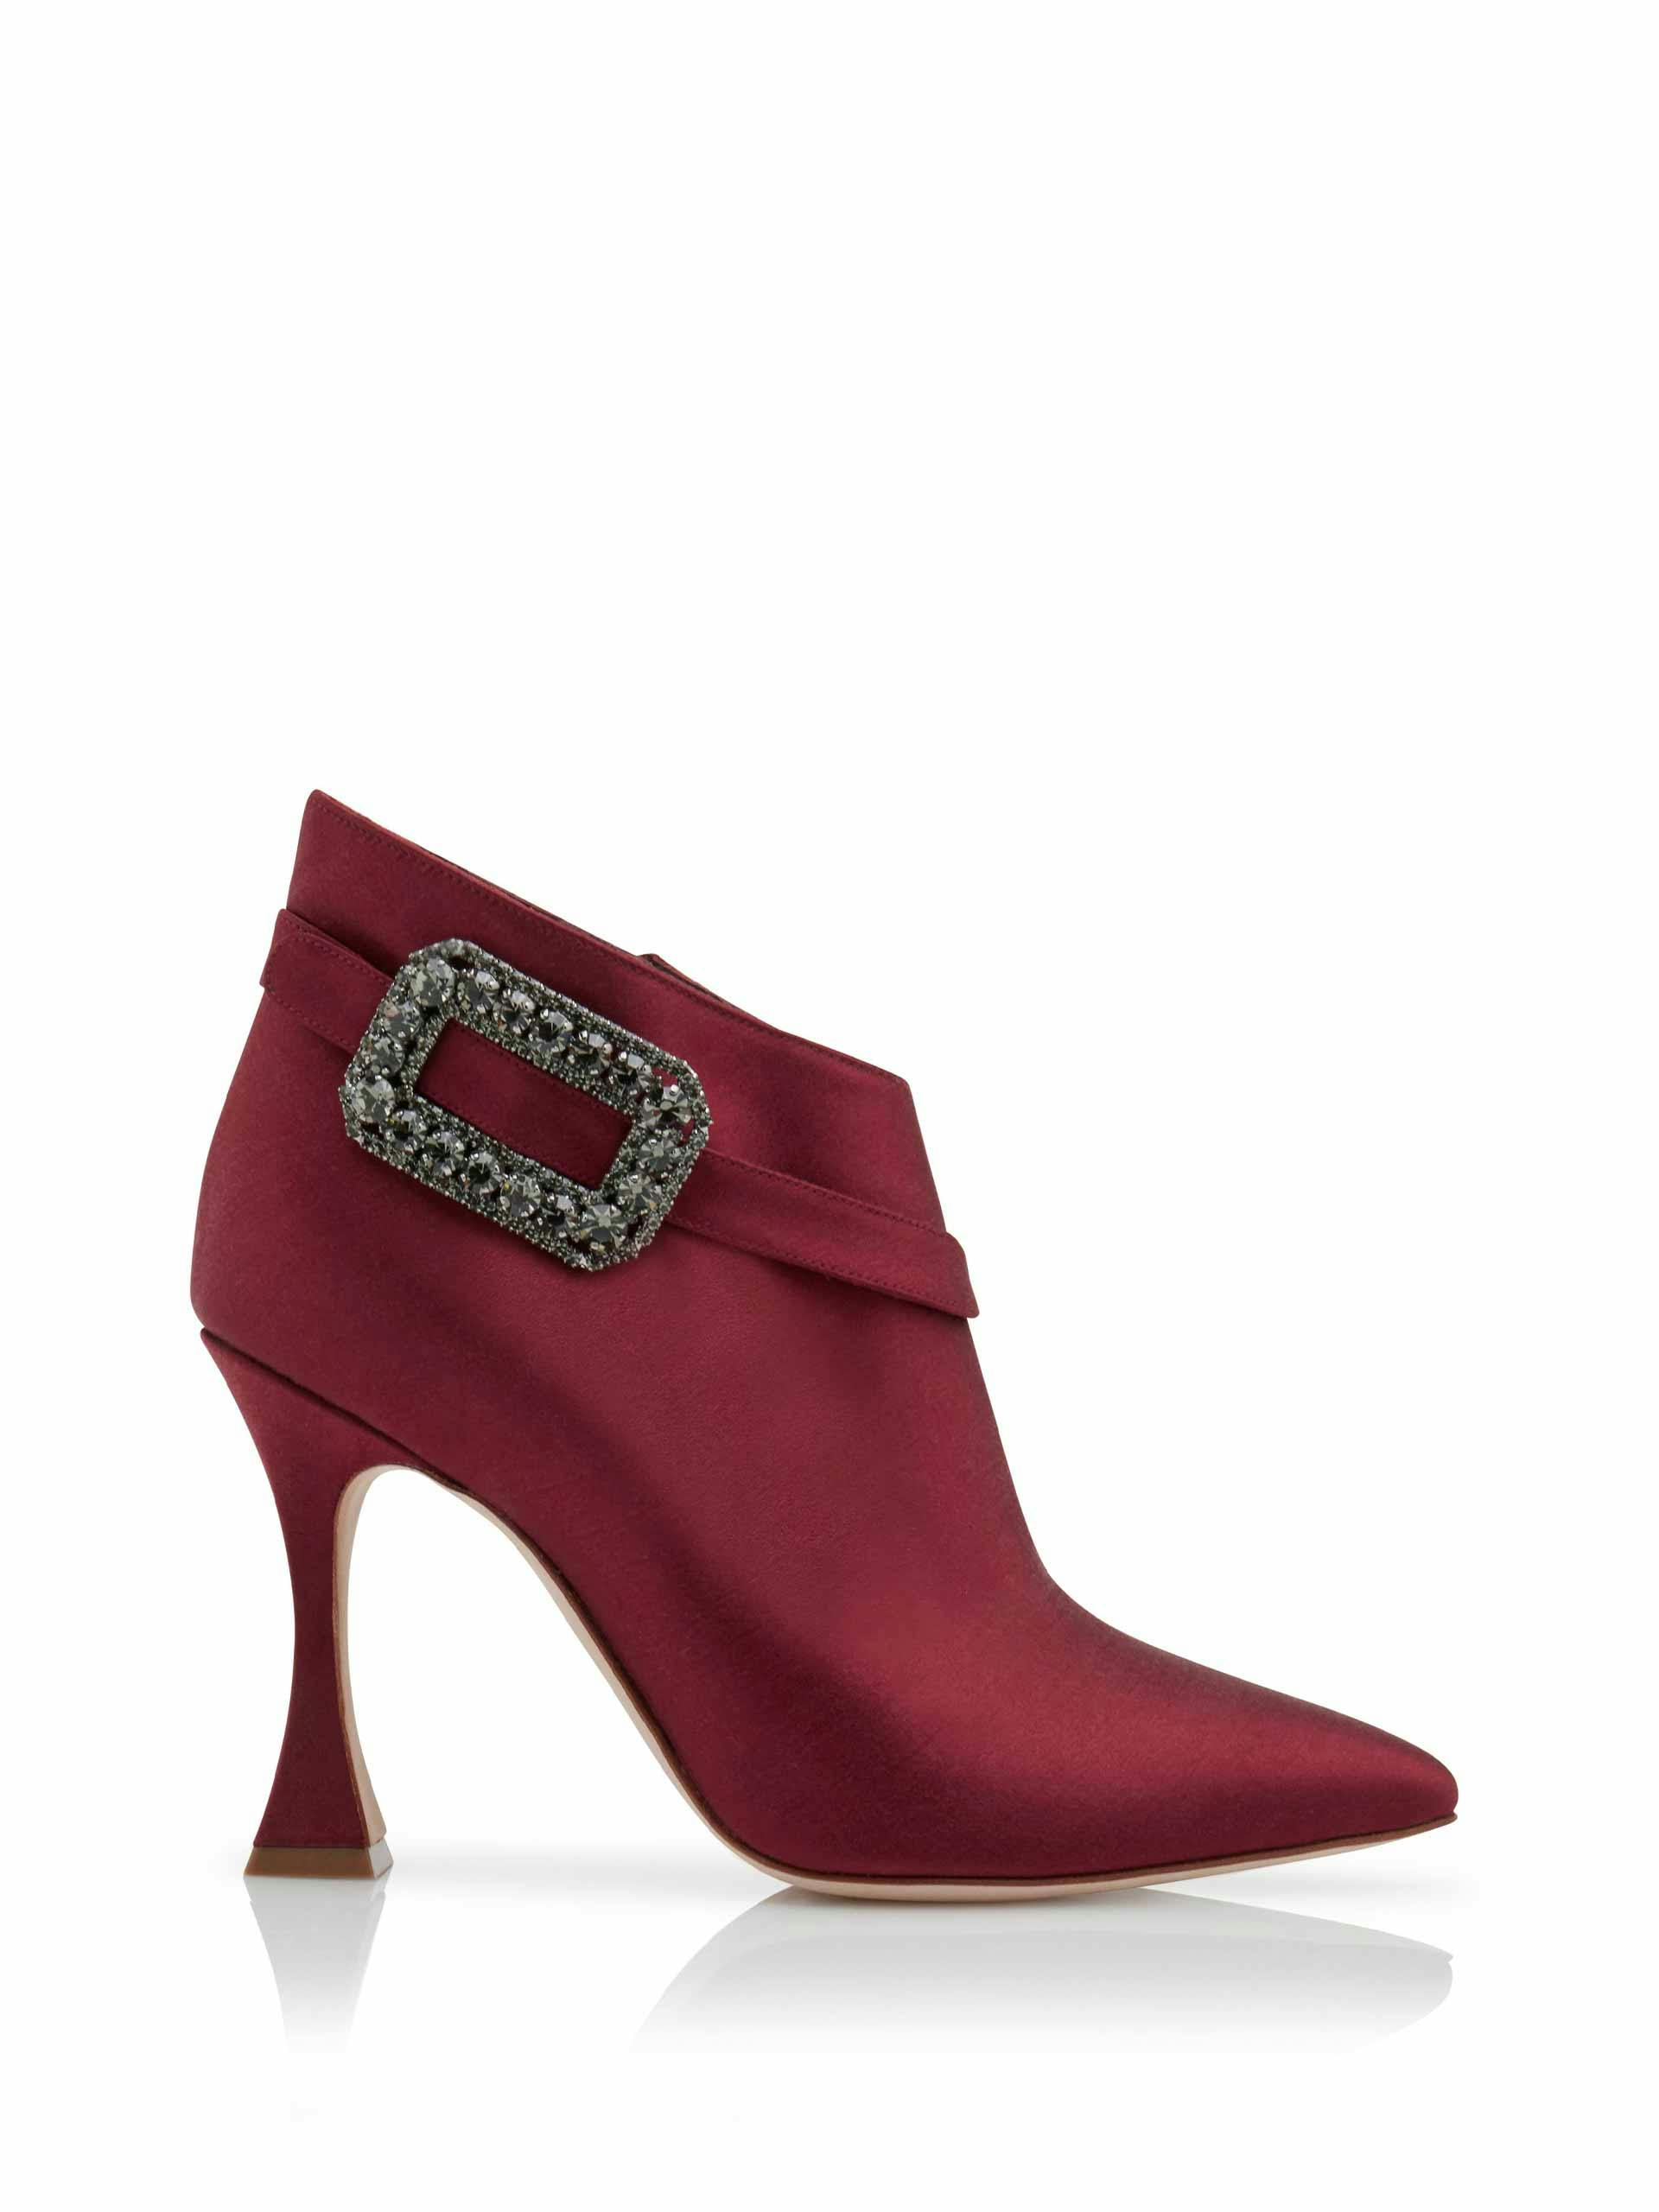 Red satin ankle boots